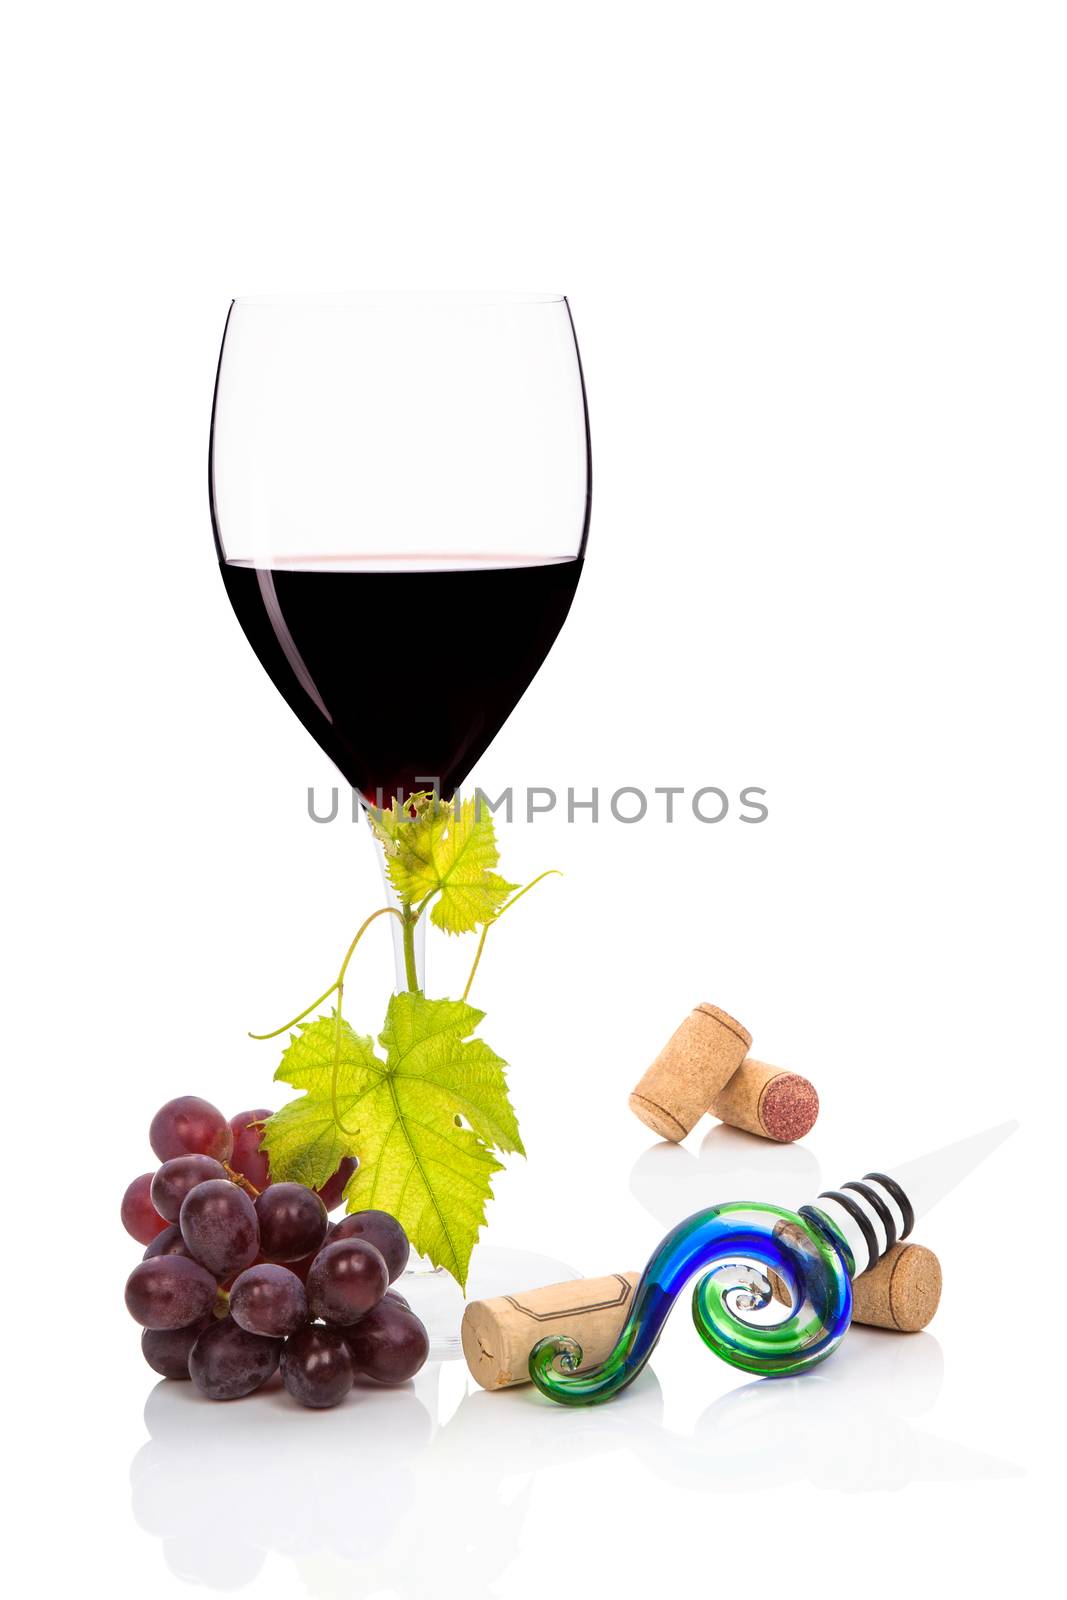 Red wine in wine glass, with cabernet sauvignon grapes, vine leaves wine stopper and wine corks isolated on white background. Culinary gourmet red wine drinking.